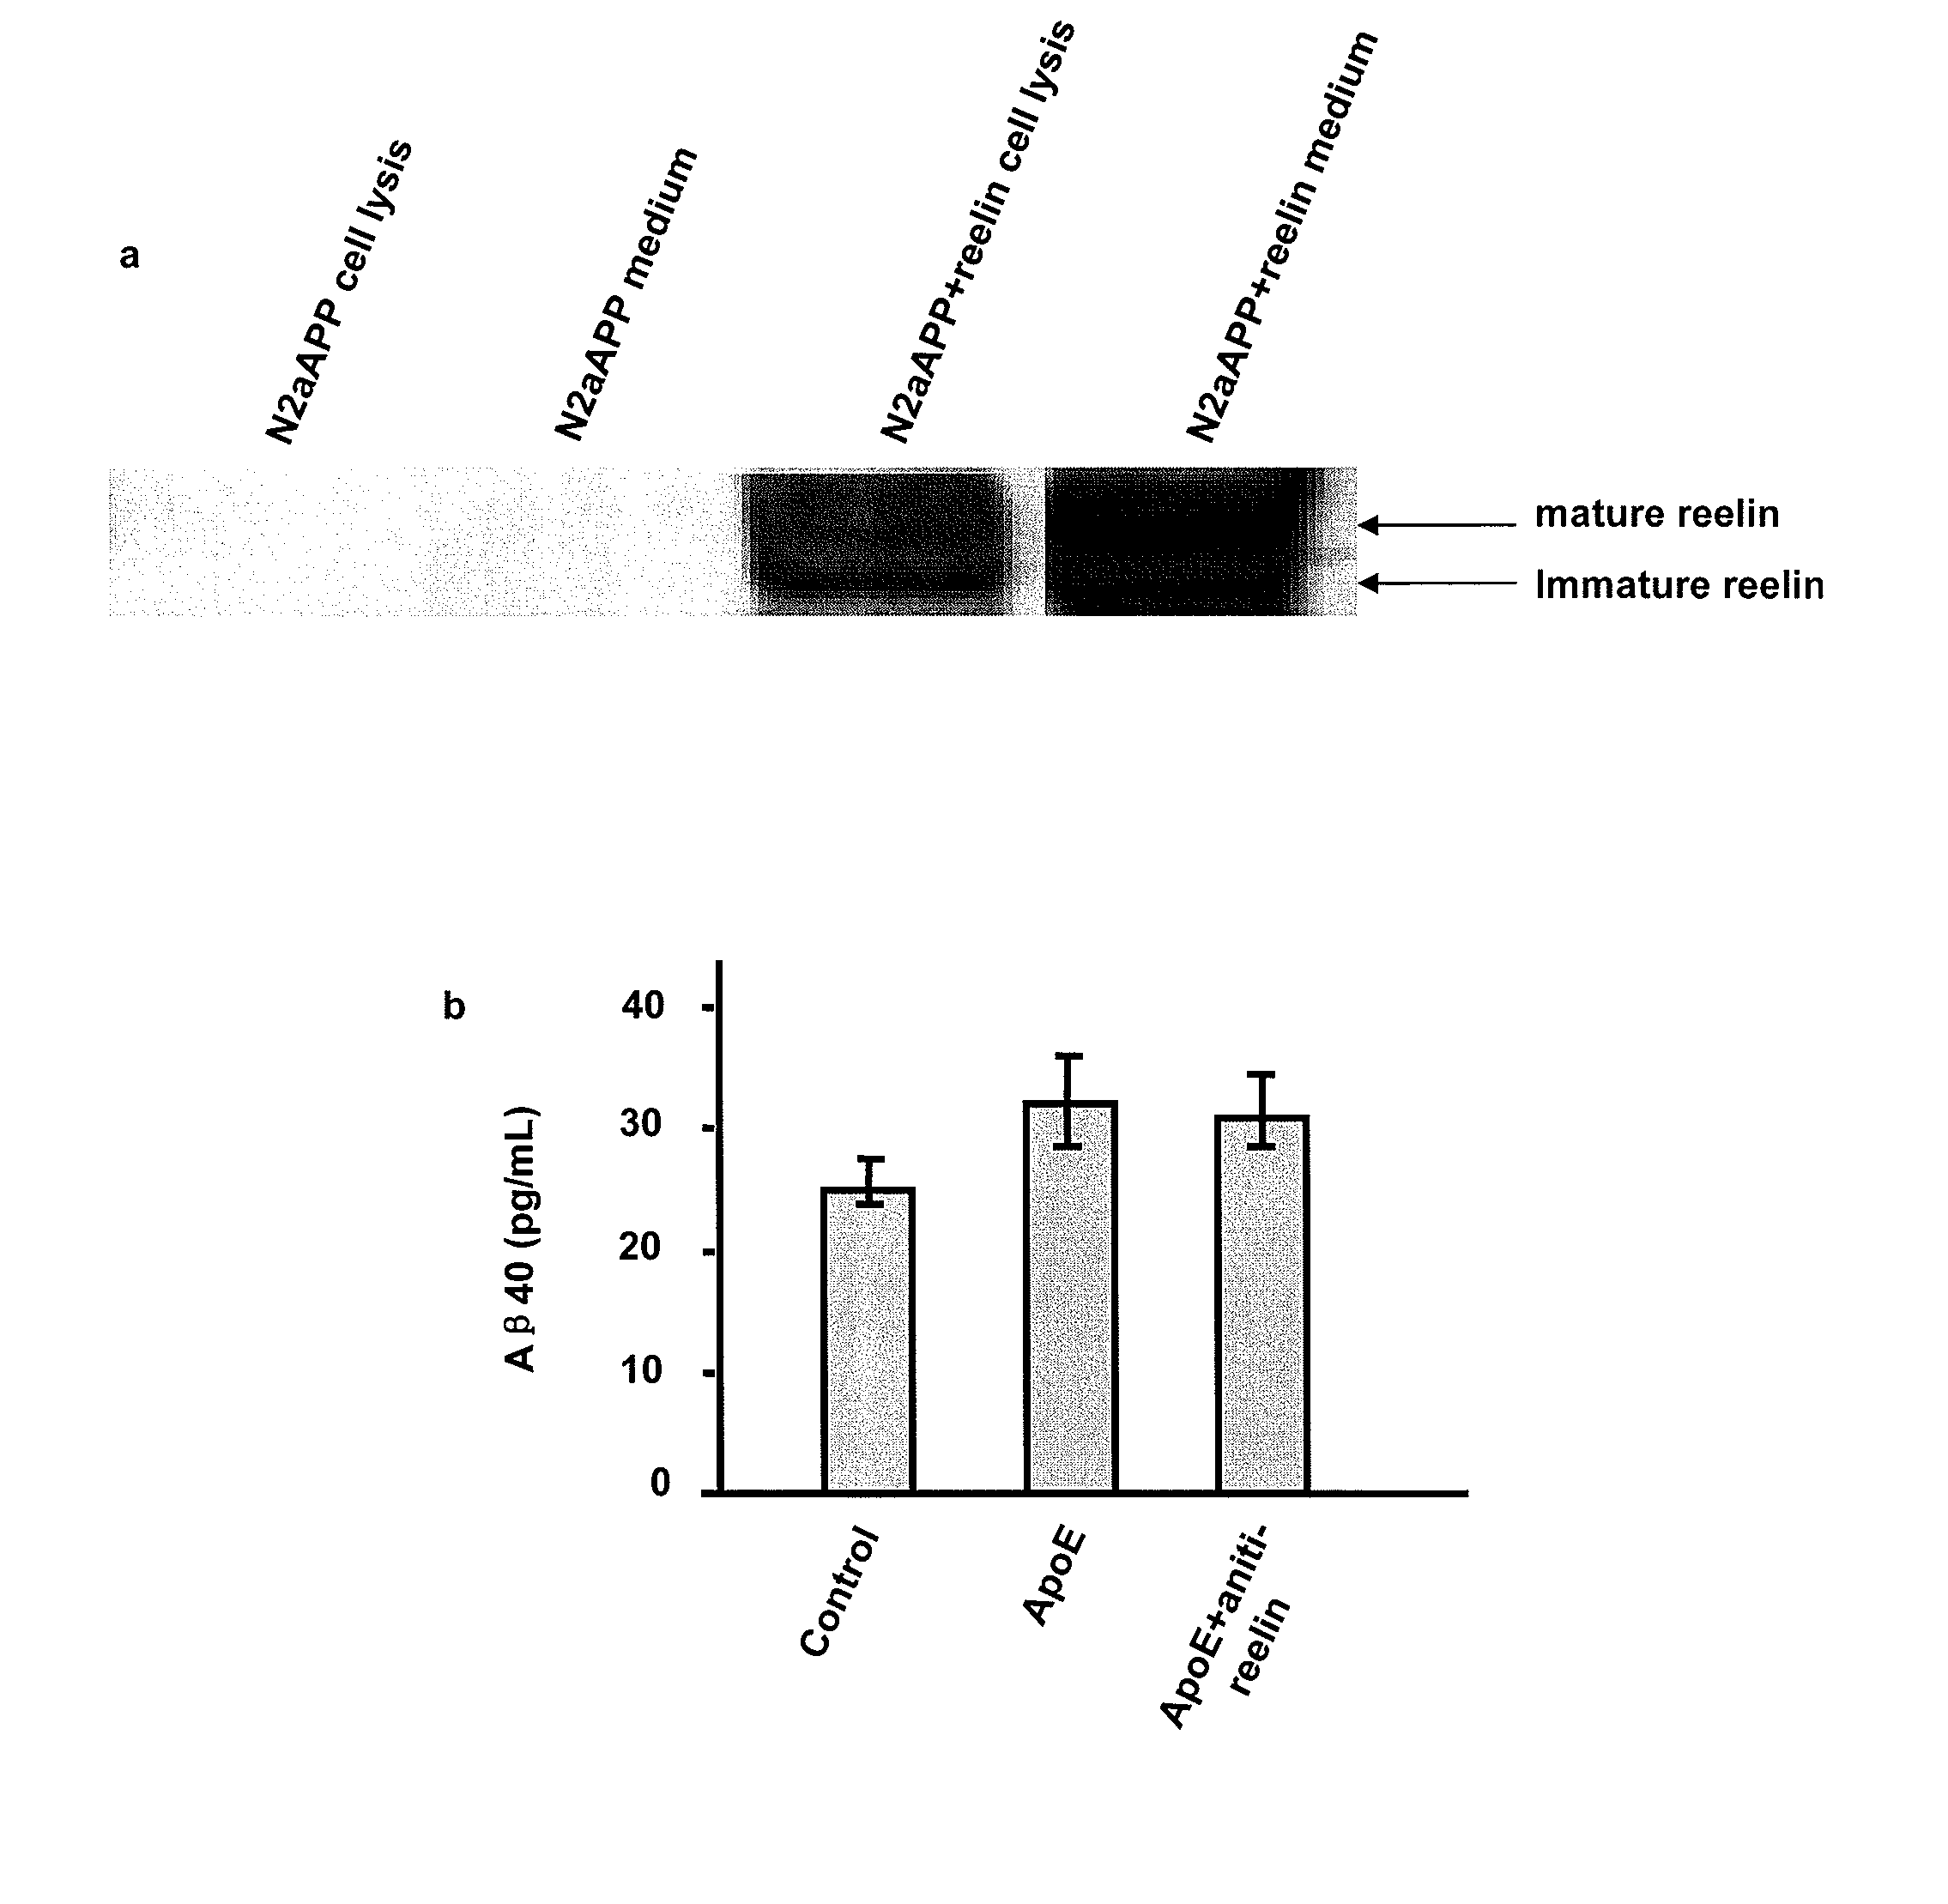 Treatment of alzheimer's disease with inhibitors of apoe binding to apoe receptor